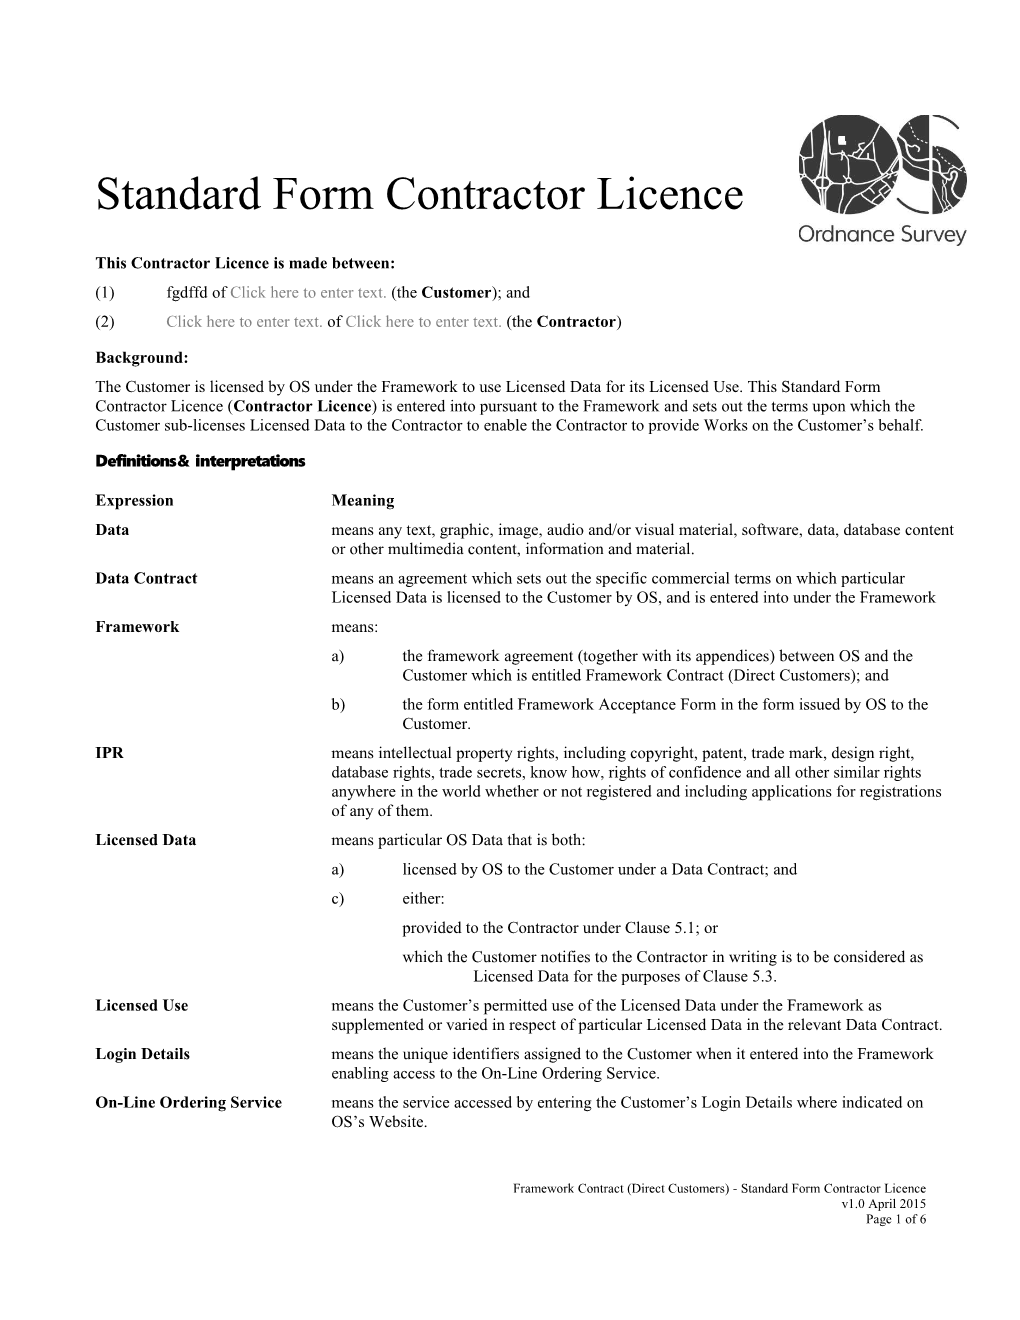 FCDC Contractor Licence